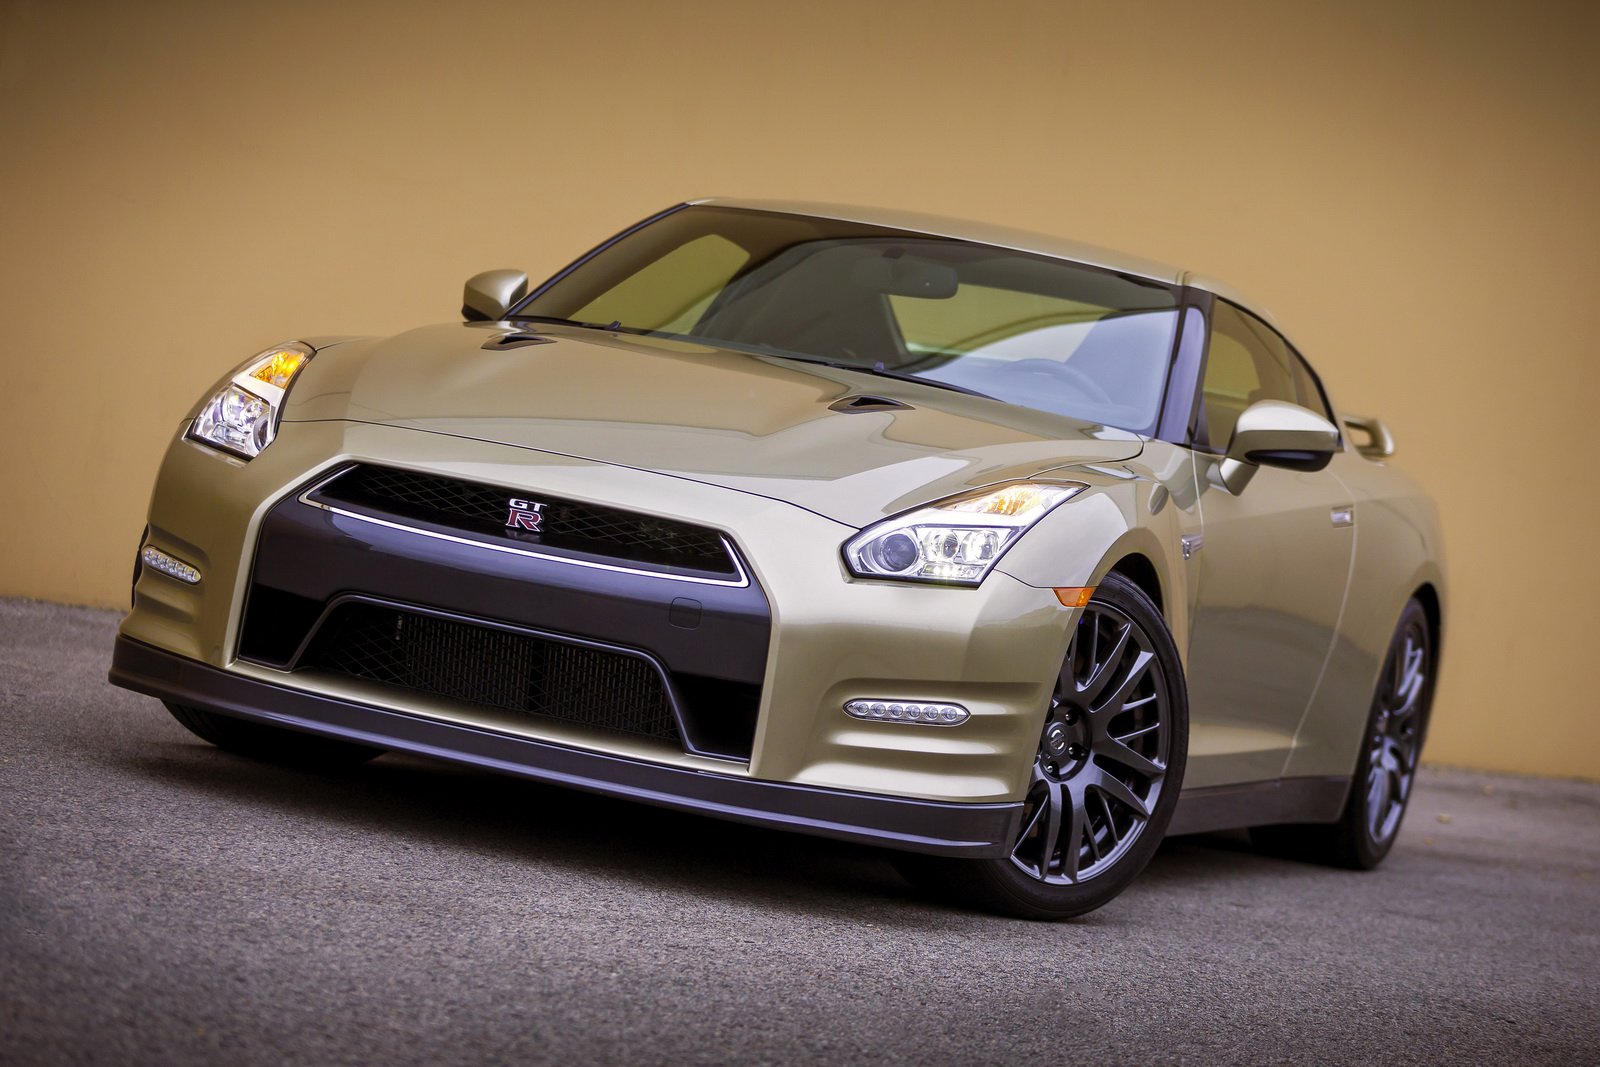 2016, Nissan, Gt r, 45th, Anniversary, Gold, Edition, Cars Wallpaper